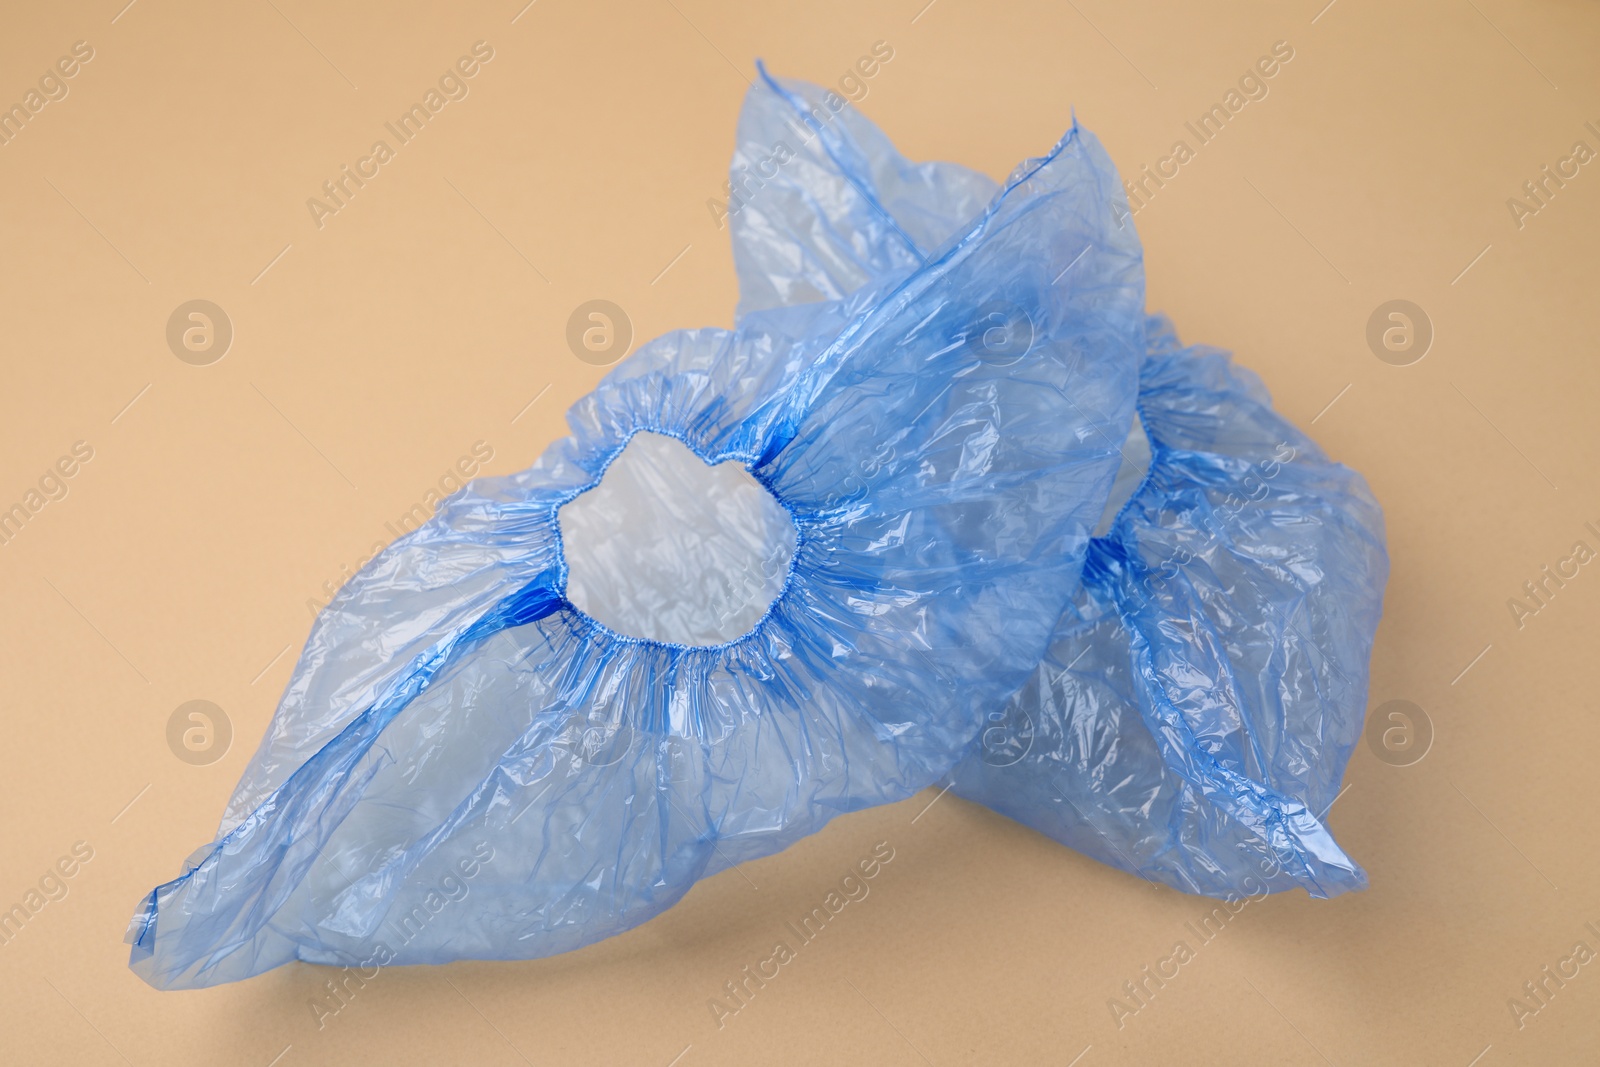 Photo of Pair of blue medical shoe covers on beige background, closeup